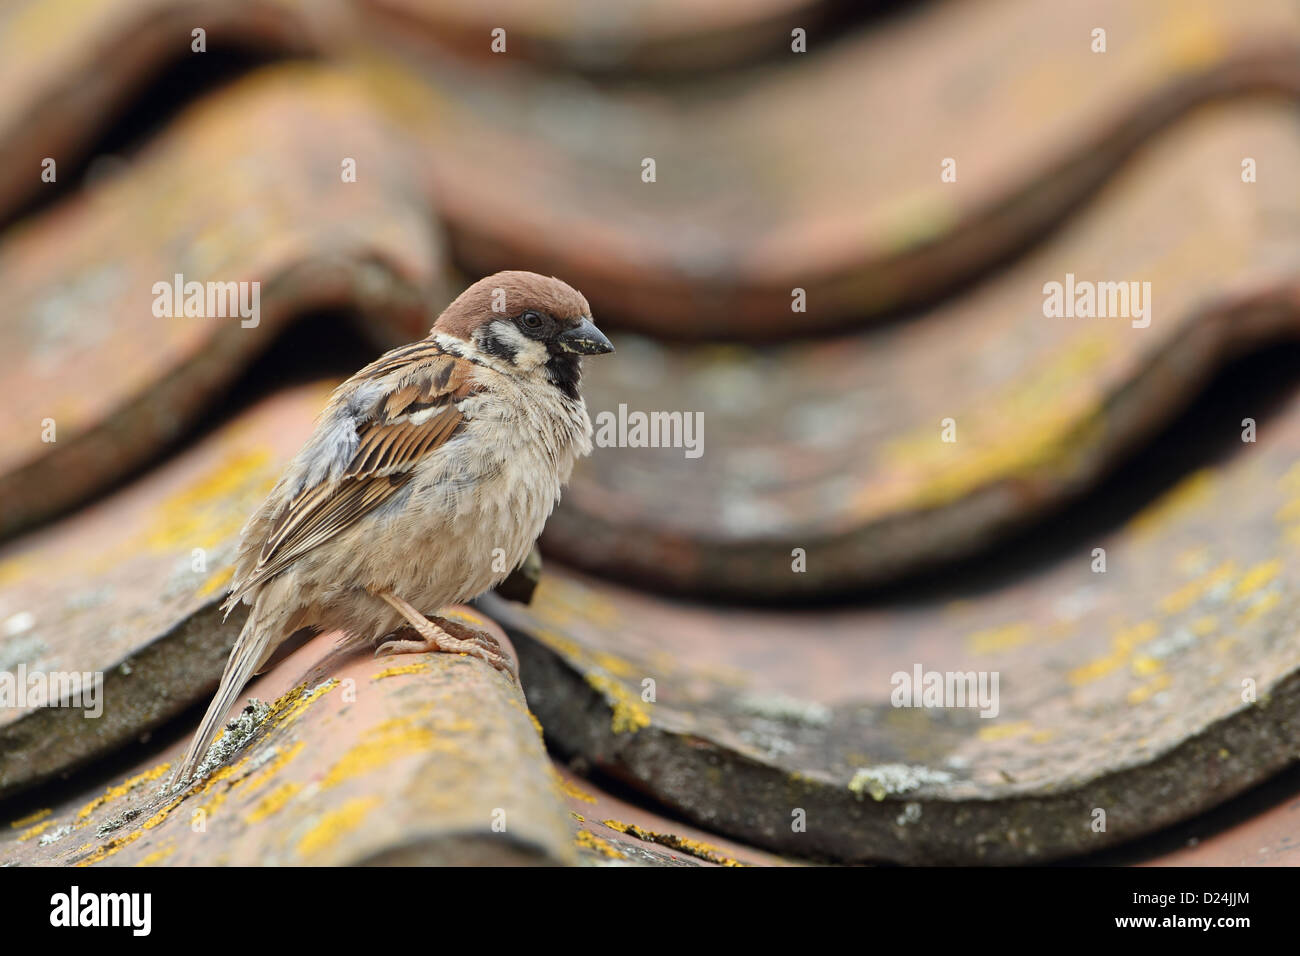 Eurasian Tree Sparrow (Passer montanus) adult, perched on tiled roof, Yorkshire, England, july Stock Photo